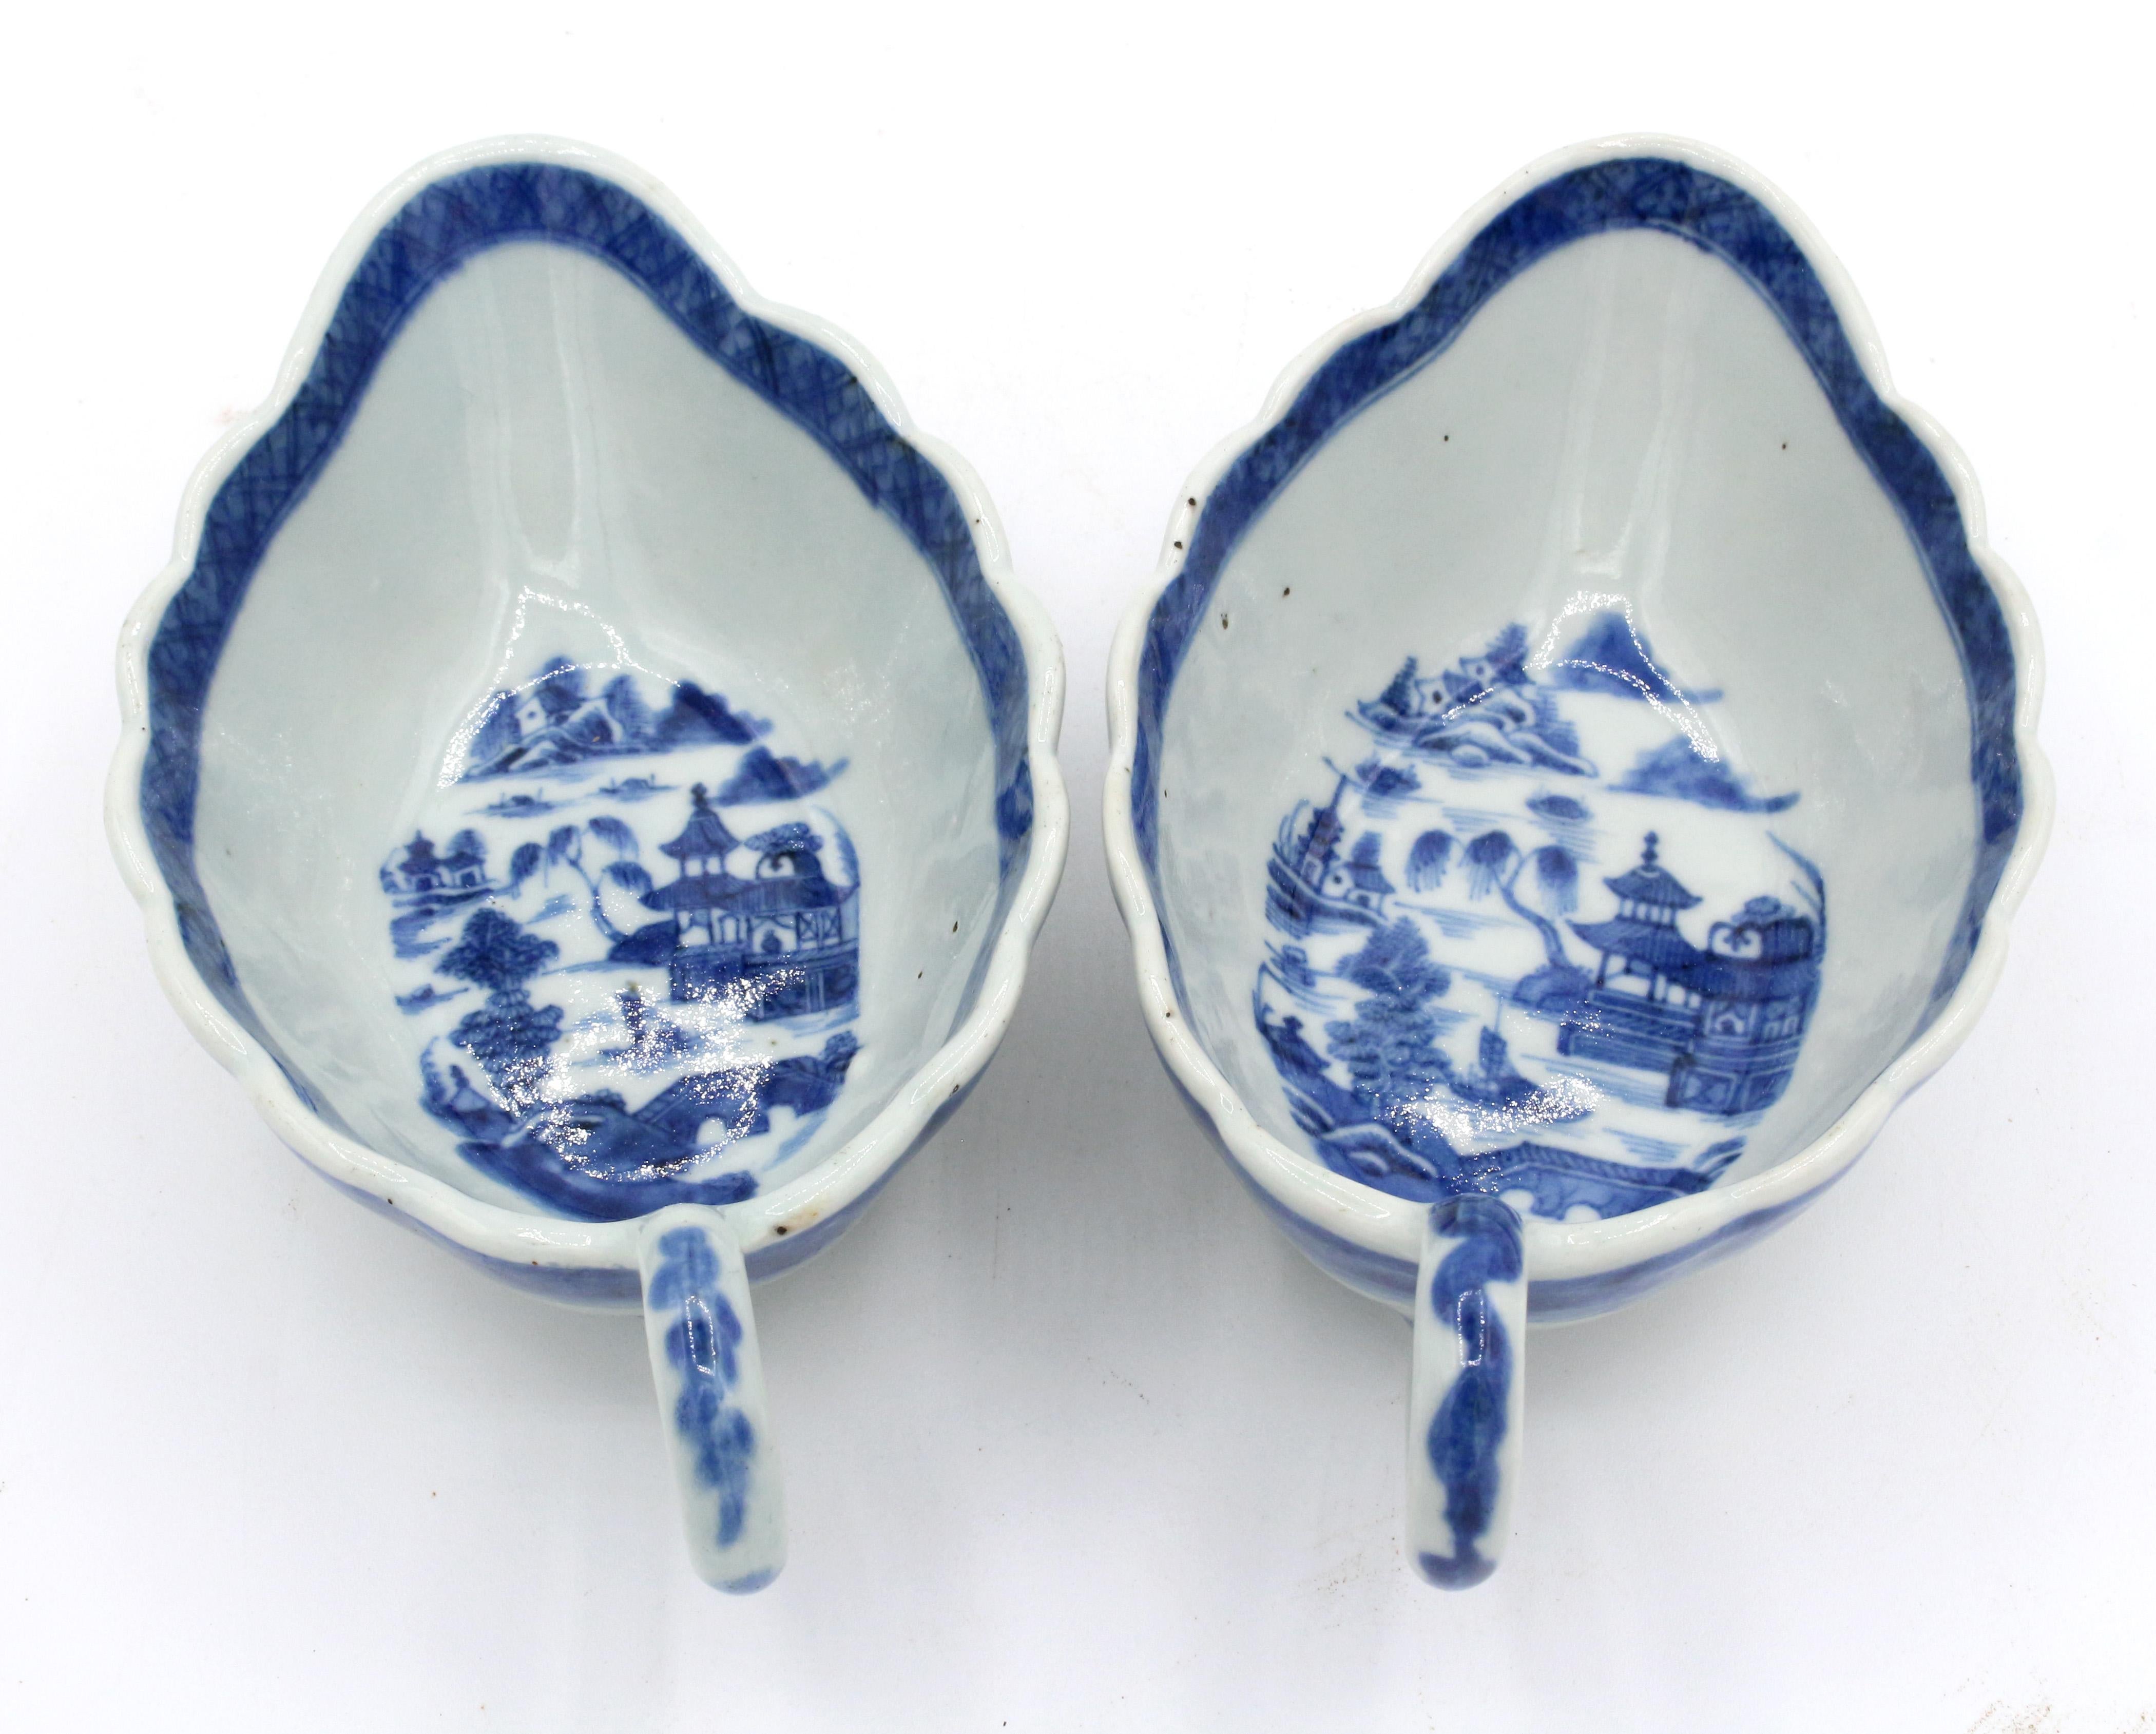 Circa 1830 near pair of Blue Canton sauce boats, Chinese. Leaf shaped with undulating borders & loop handles. Some kiln pops. Stilt marks. 7.5